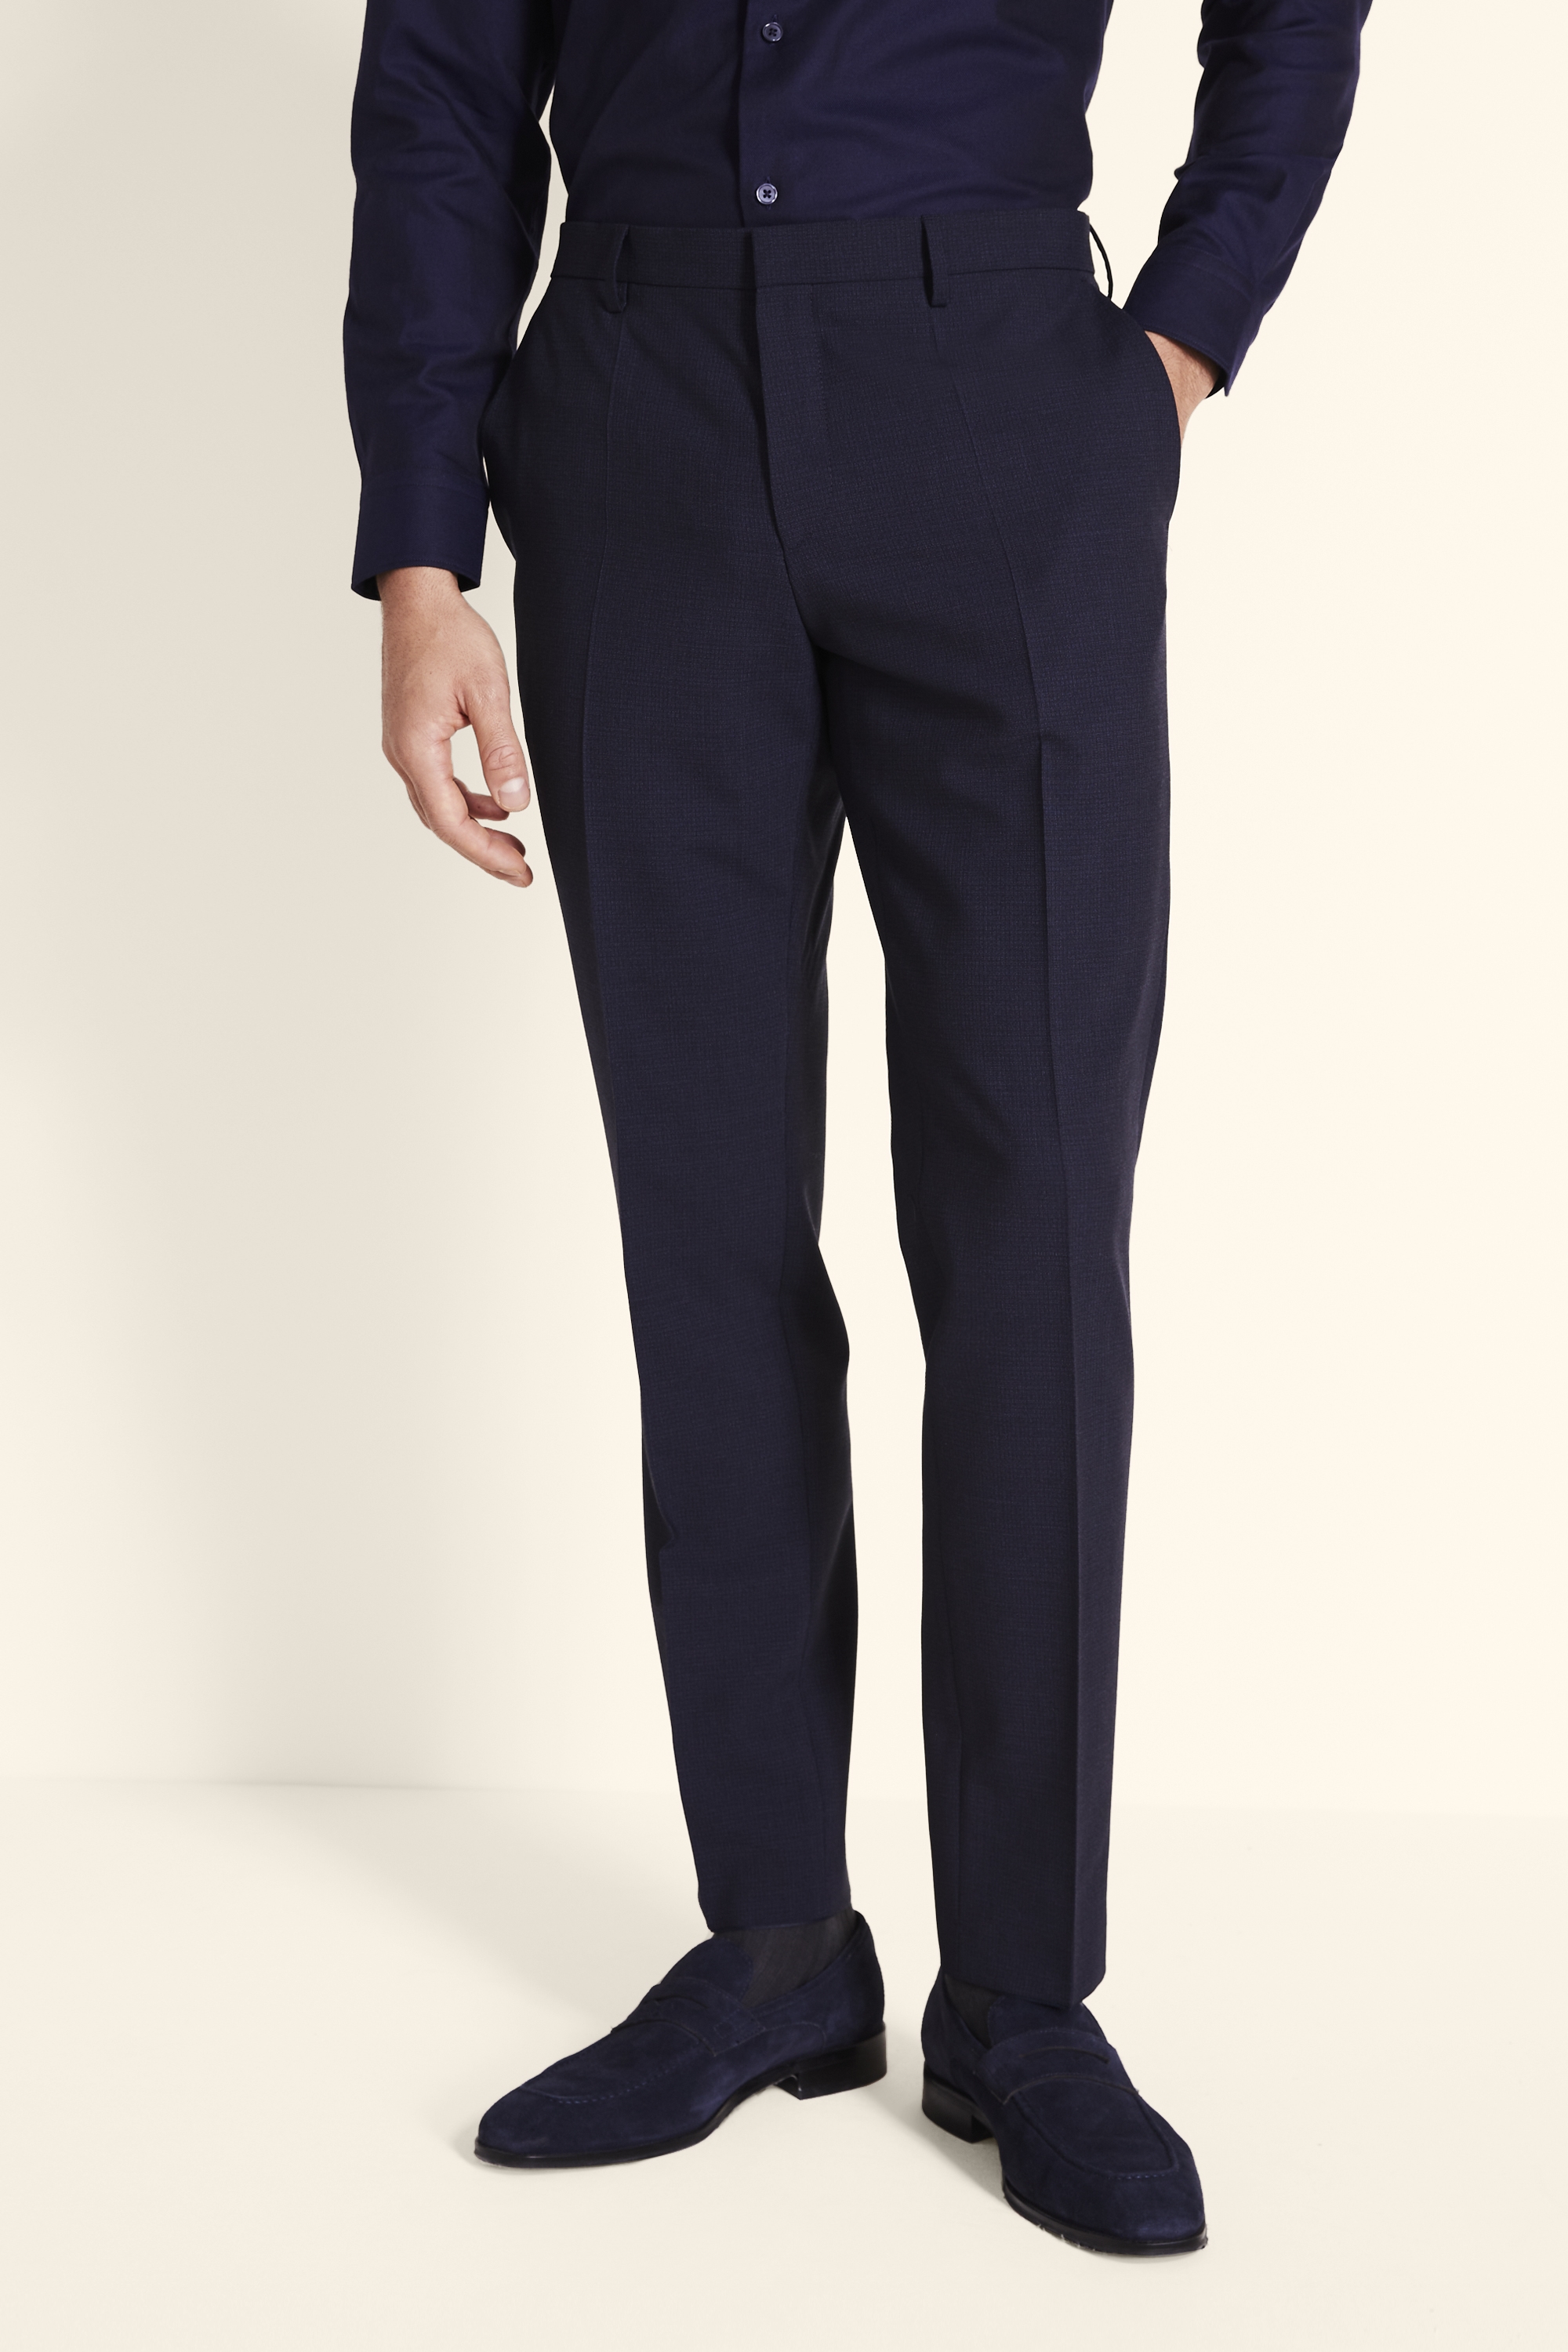 Buy Men Navy Solid Carrot Fit Casual Trousers Online  808071  Peter  England